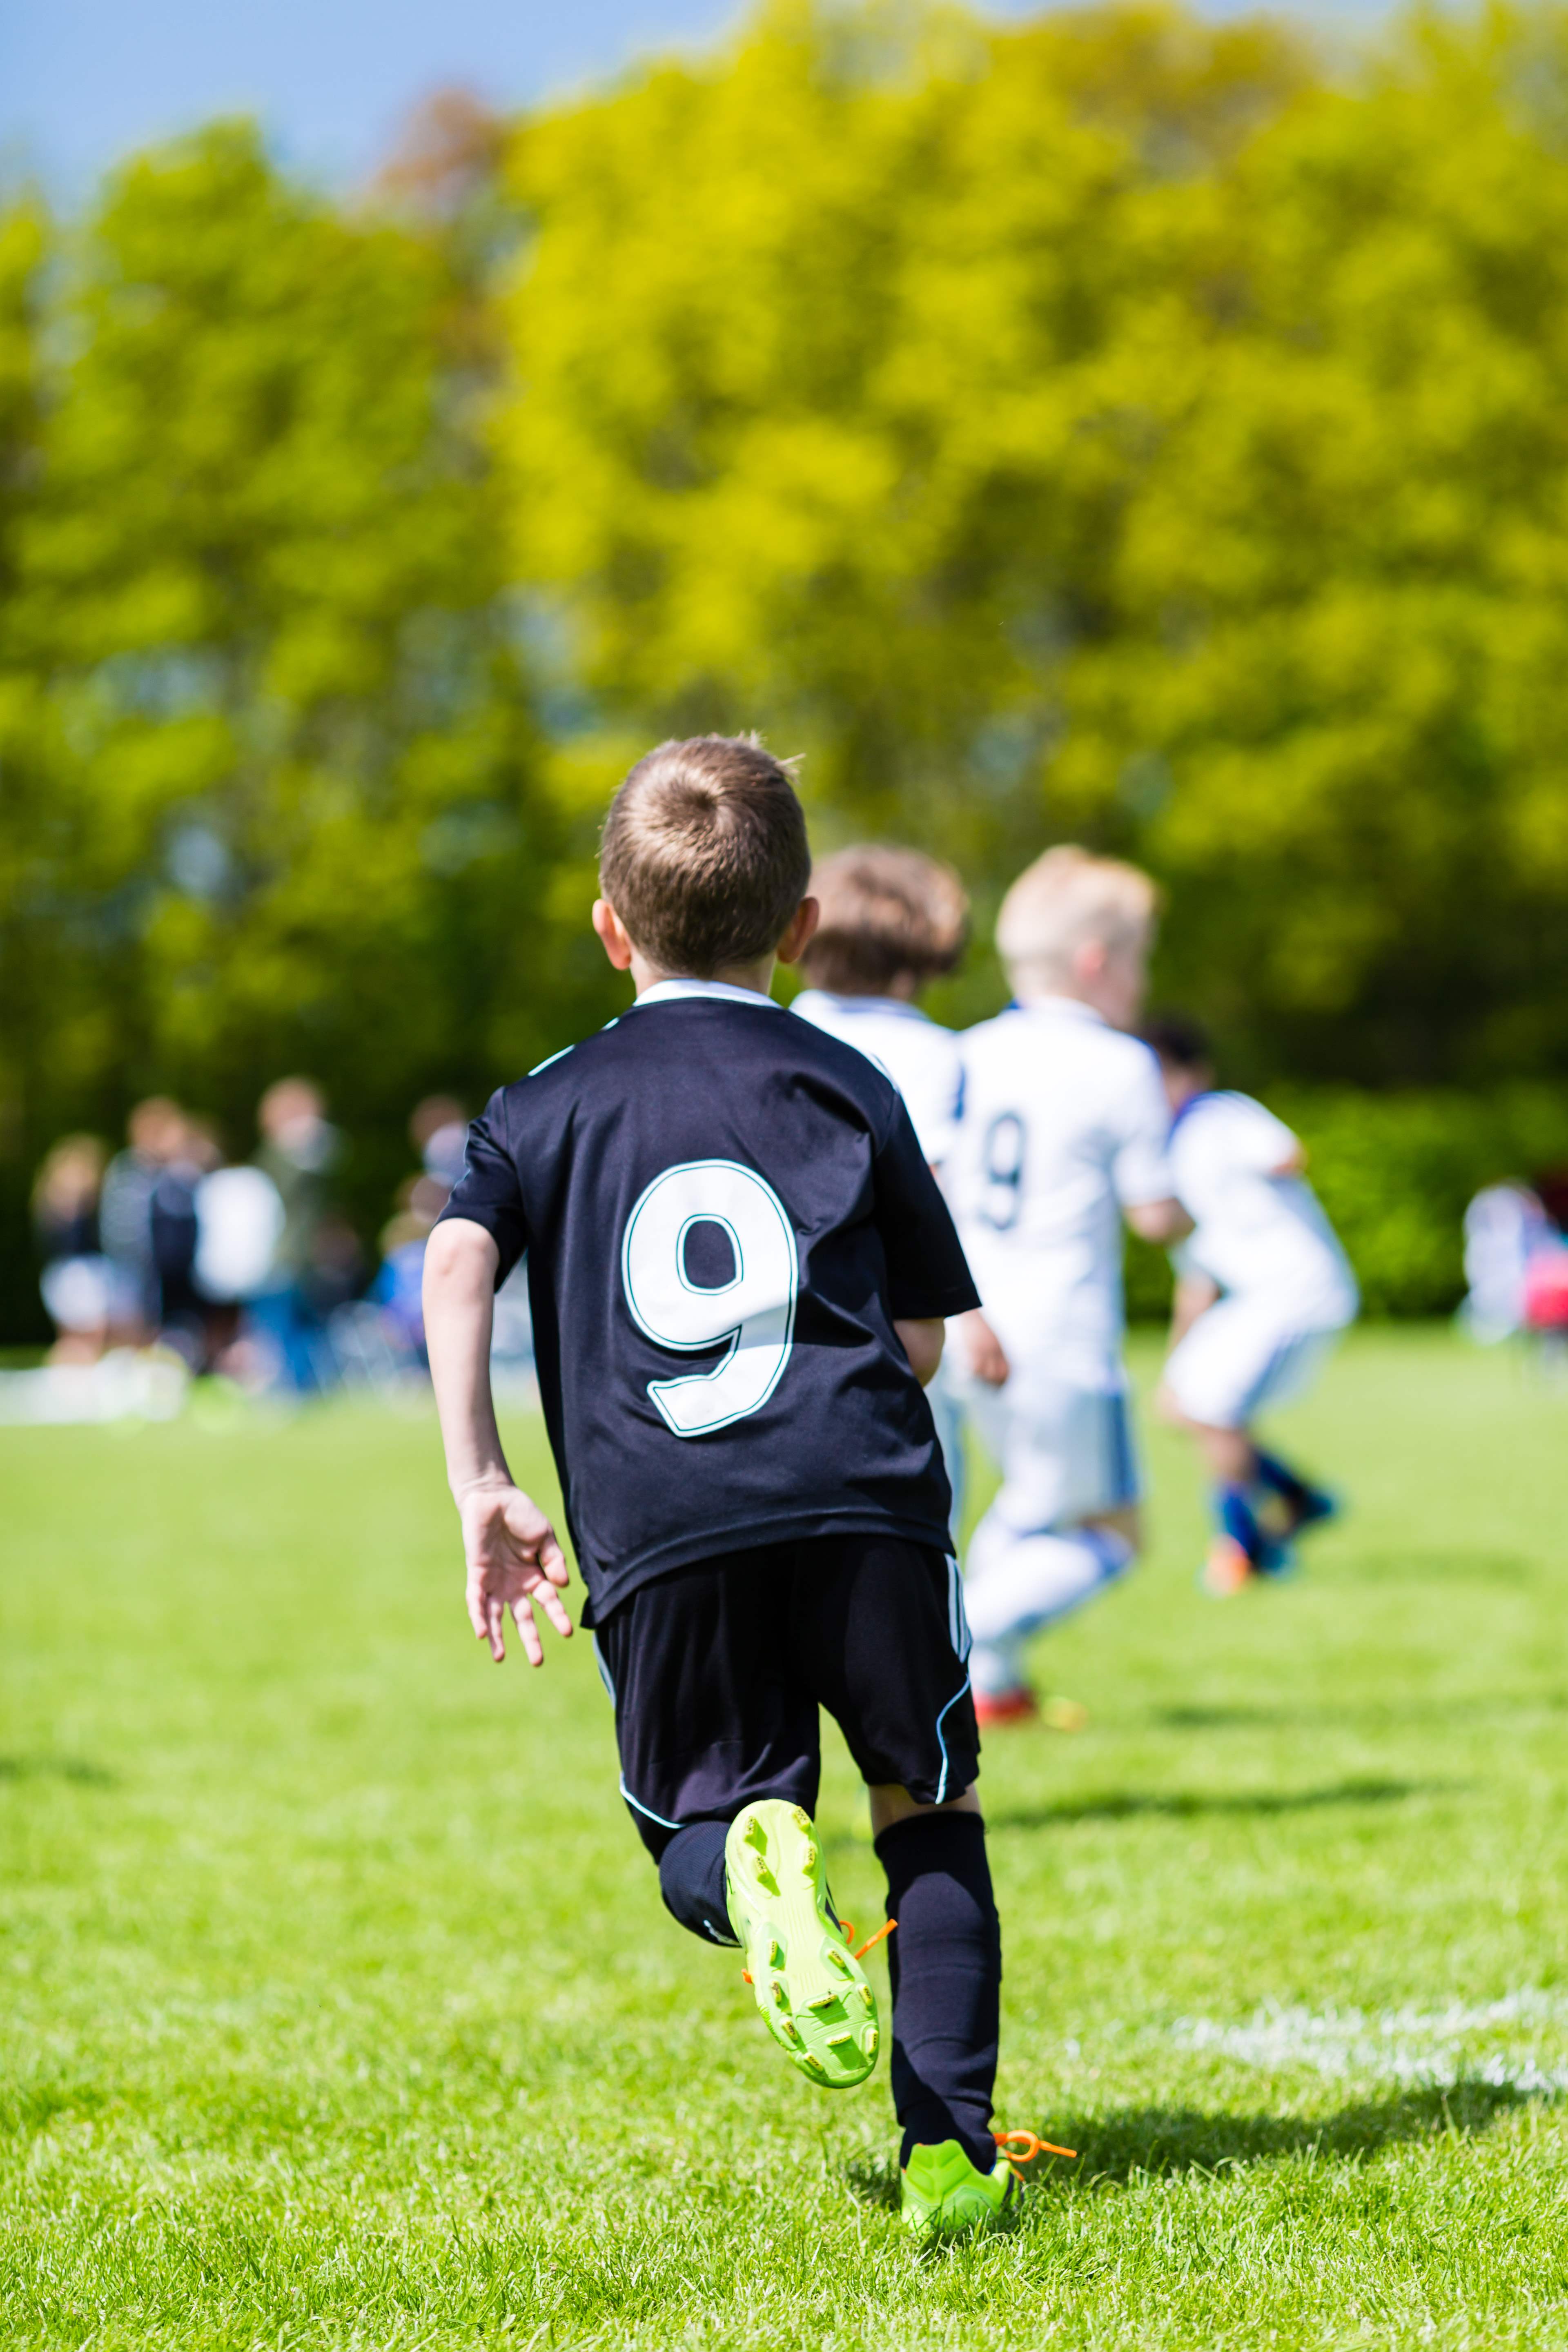 Young boy watching his team mates play a kids soccer match on soccer field with green grass.